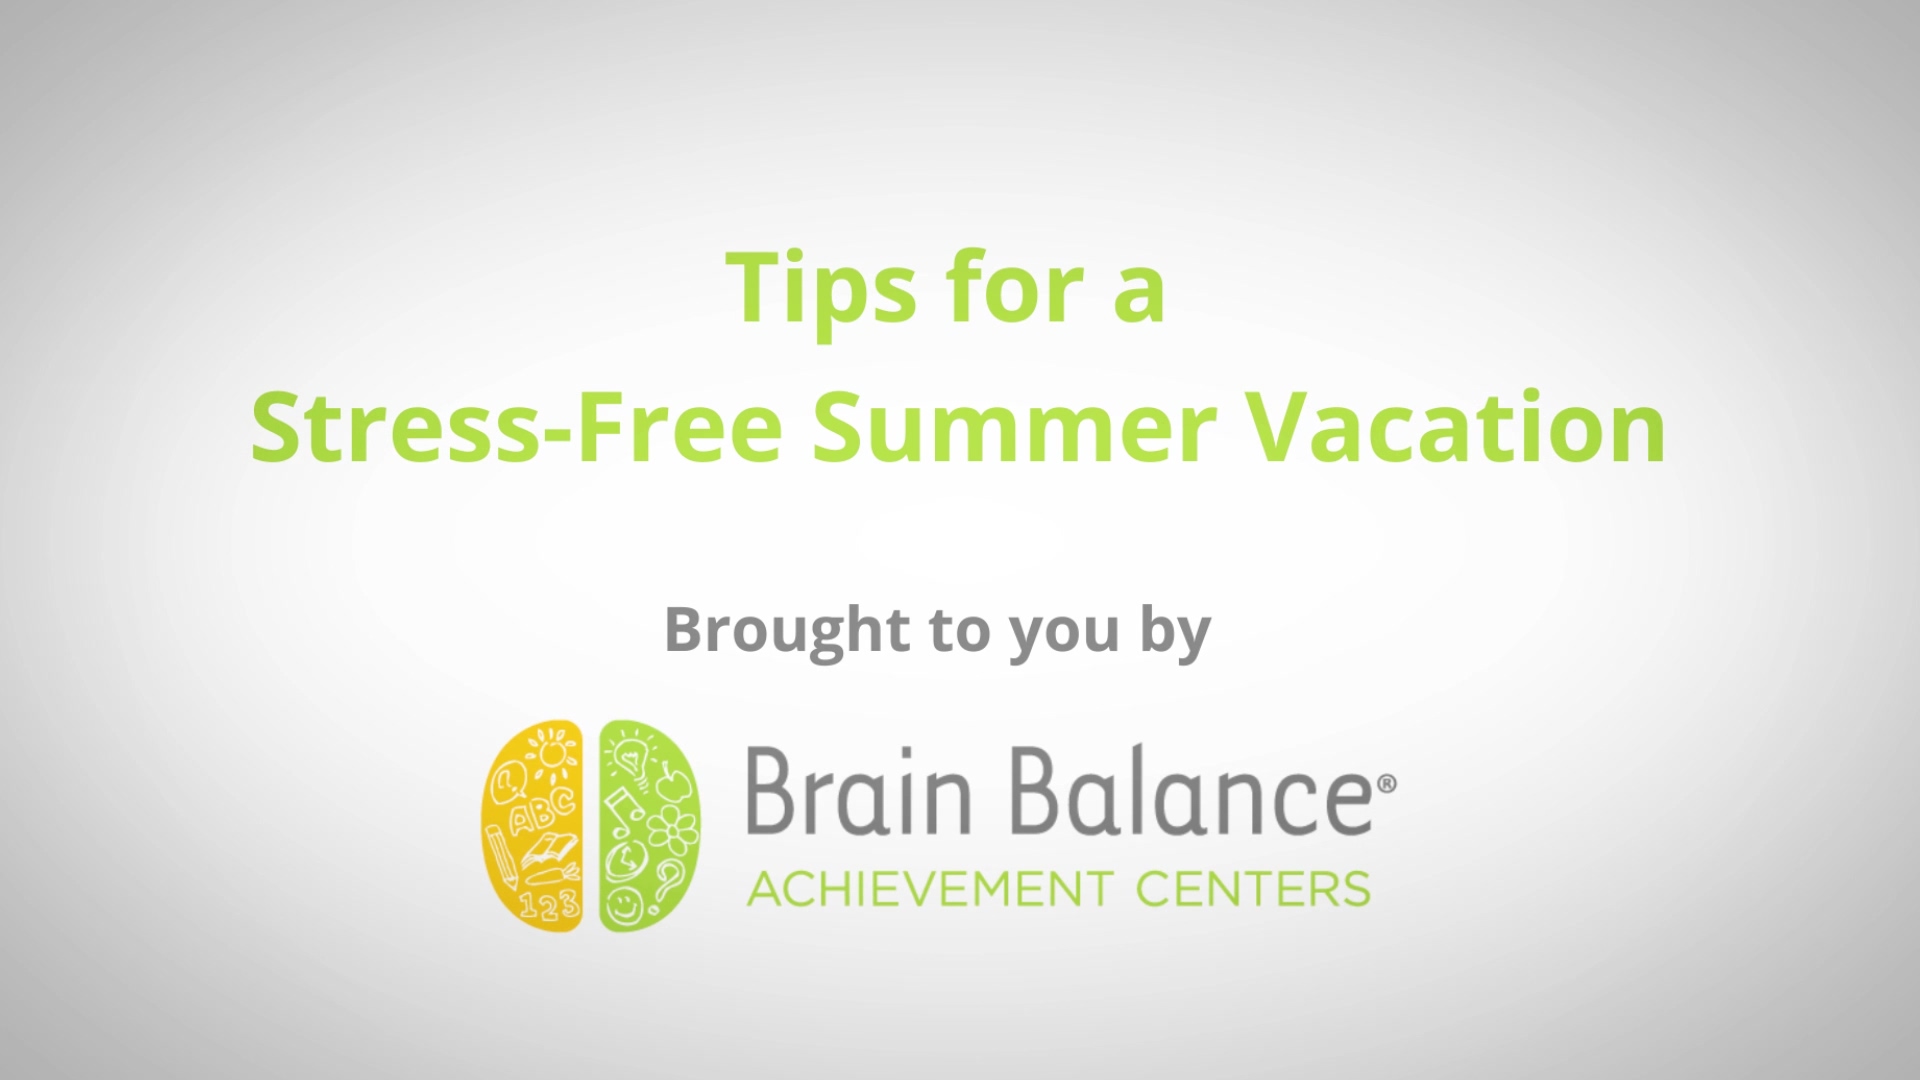 Brain Balance Achievement Centers — Tips for a stress-free summer vacation